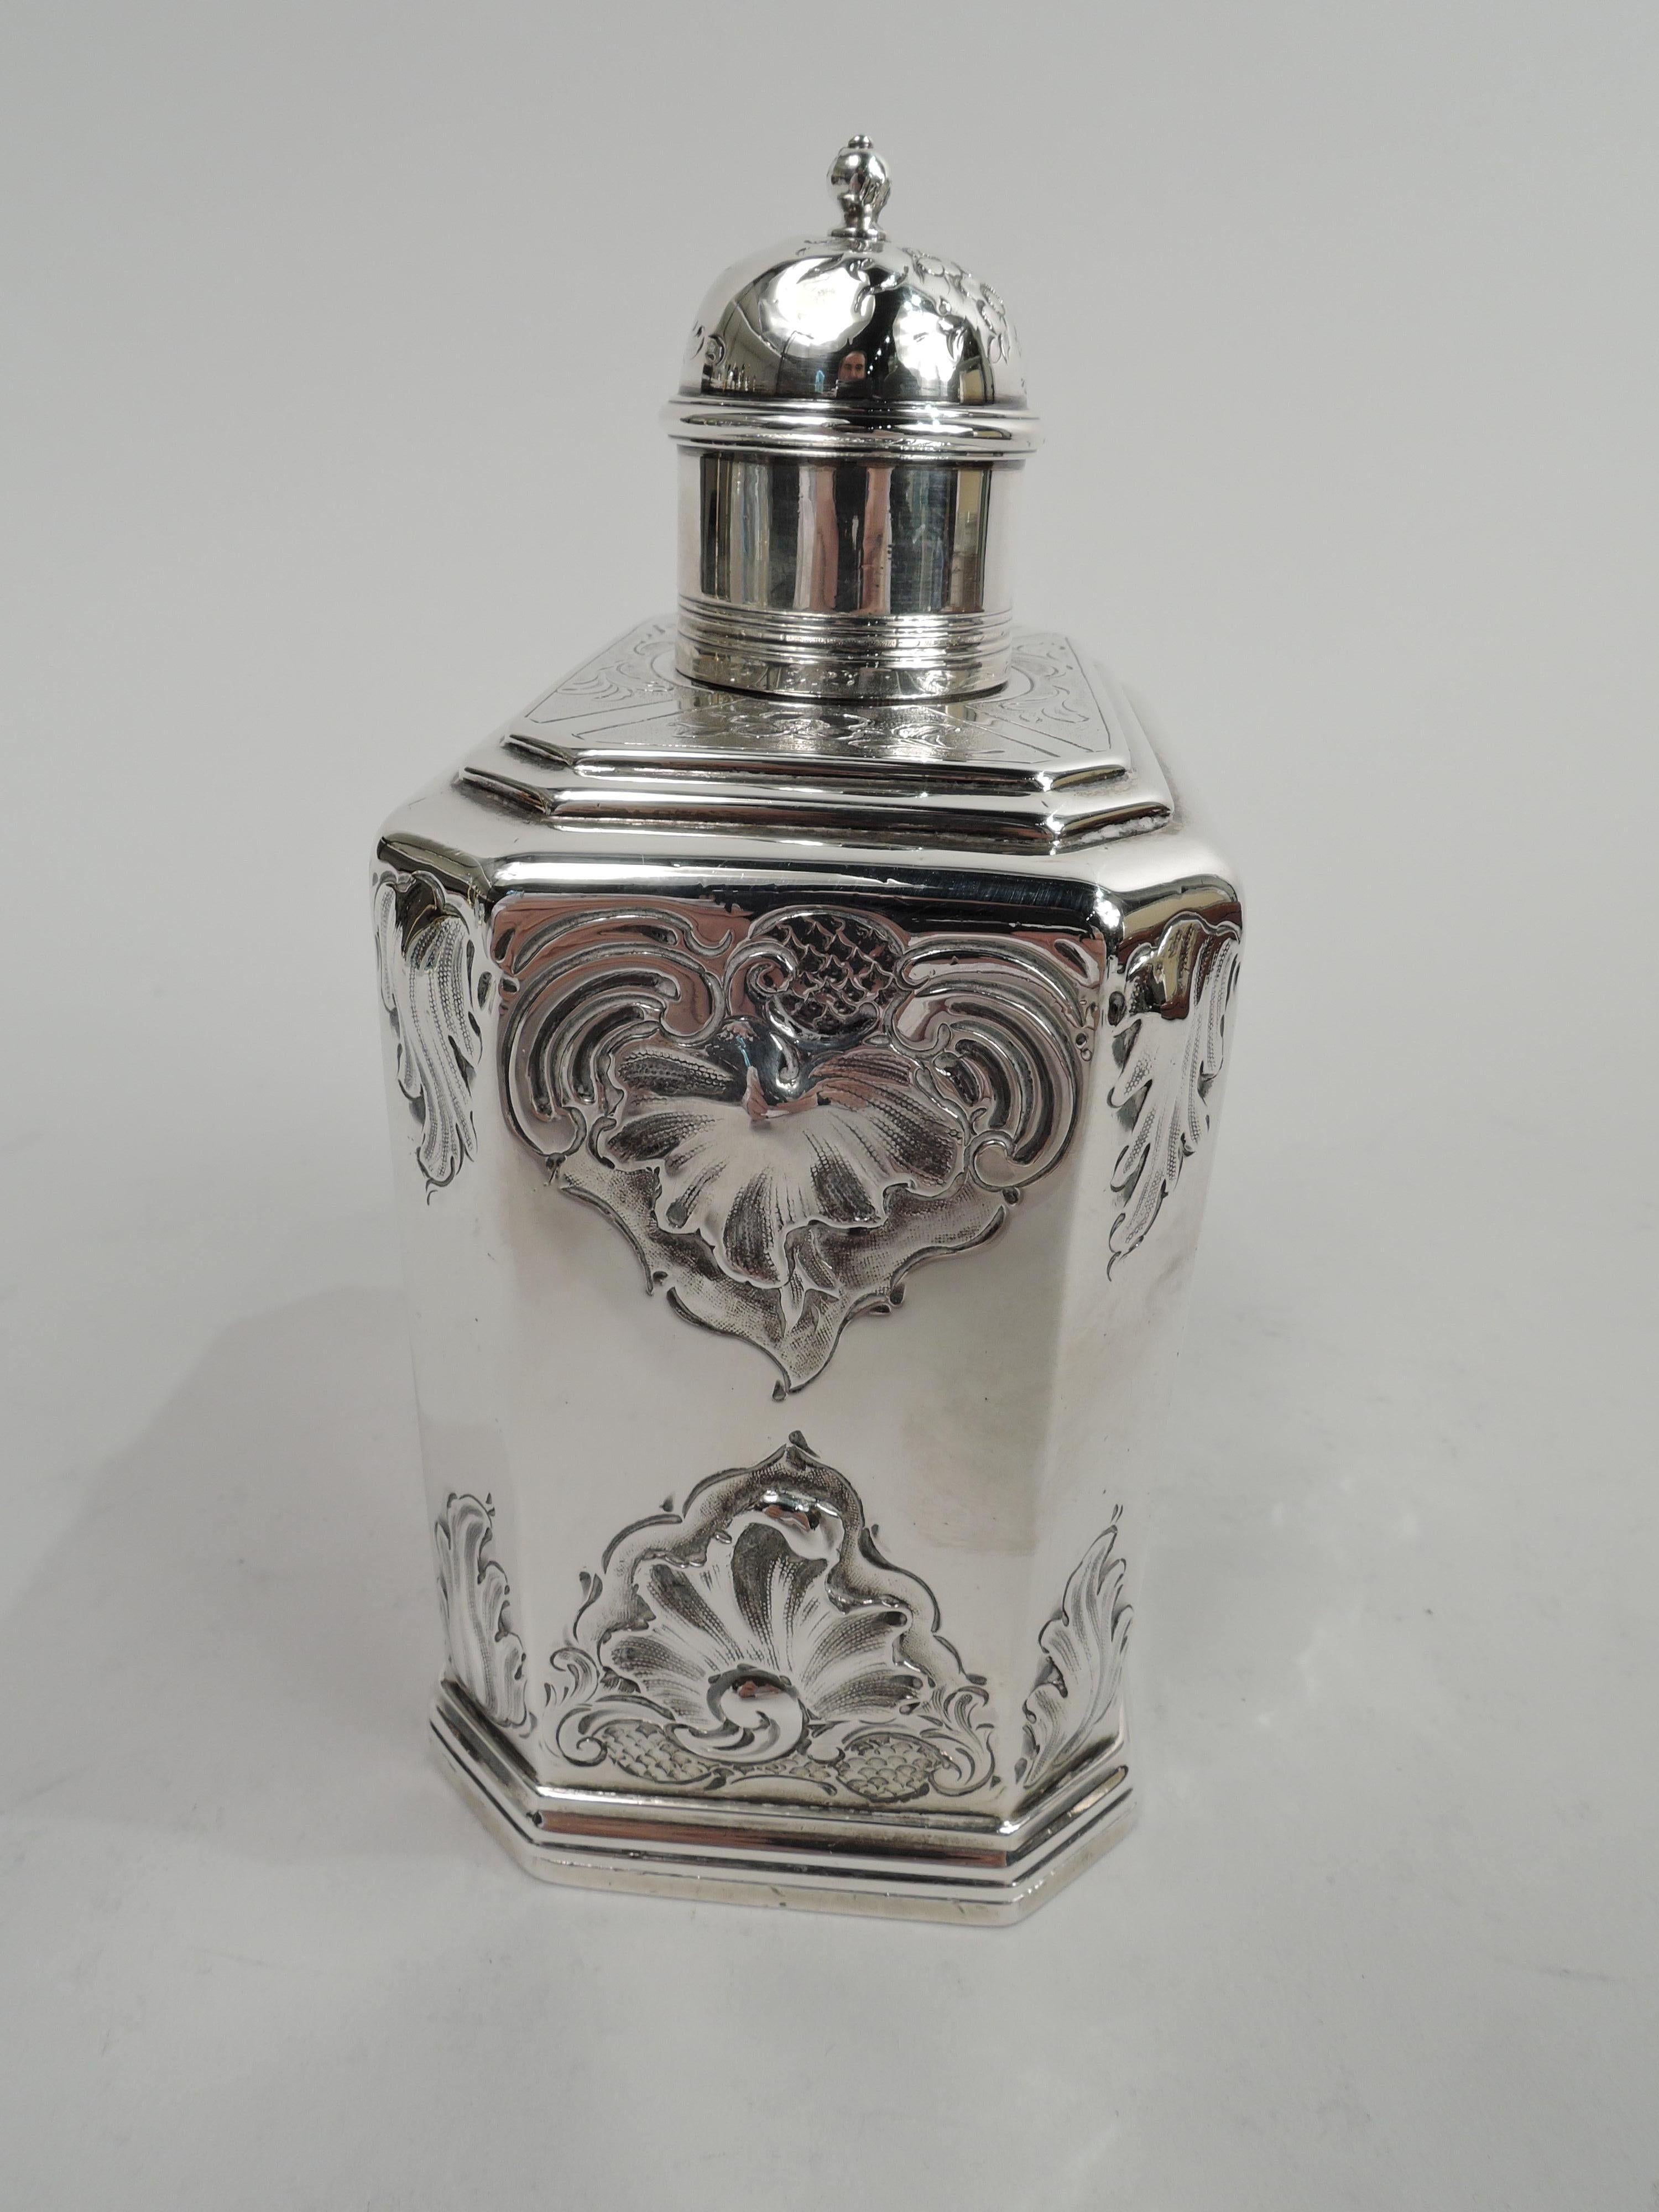 George IV sterling silver tea caddy. Made by Charles Fox II in London in 1833. Rectilinear with chamfered corners, reeded base, and stepped top. Push-and-slide panel at bottom. Neck short and straight, and cover domed with ball finial. Chased and